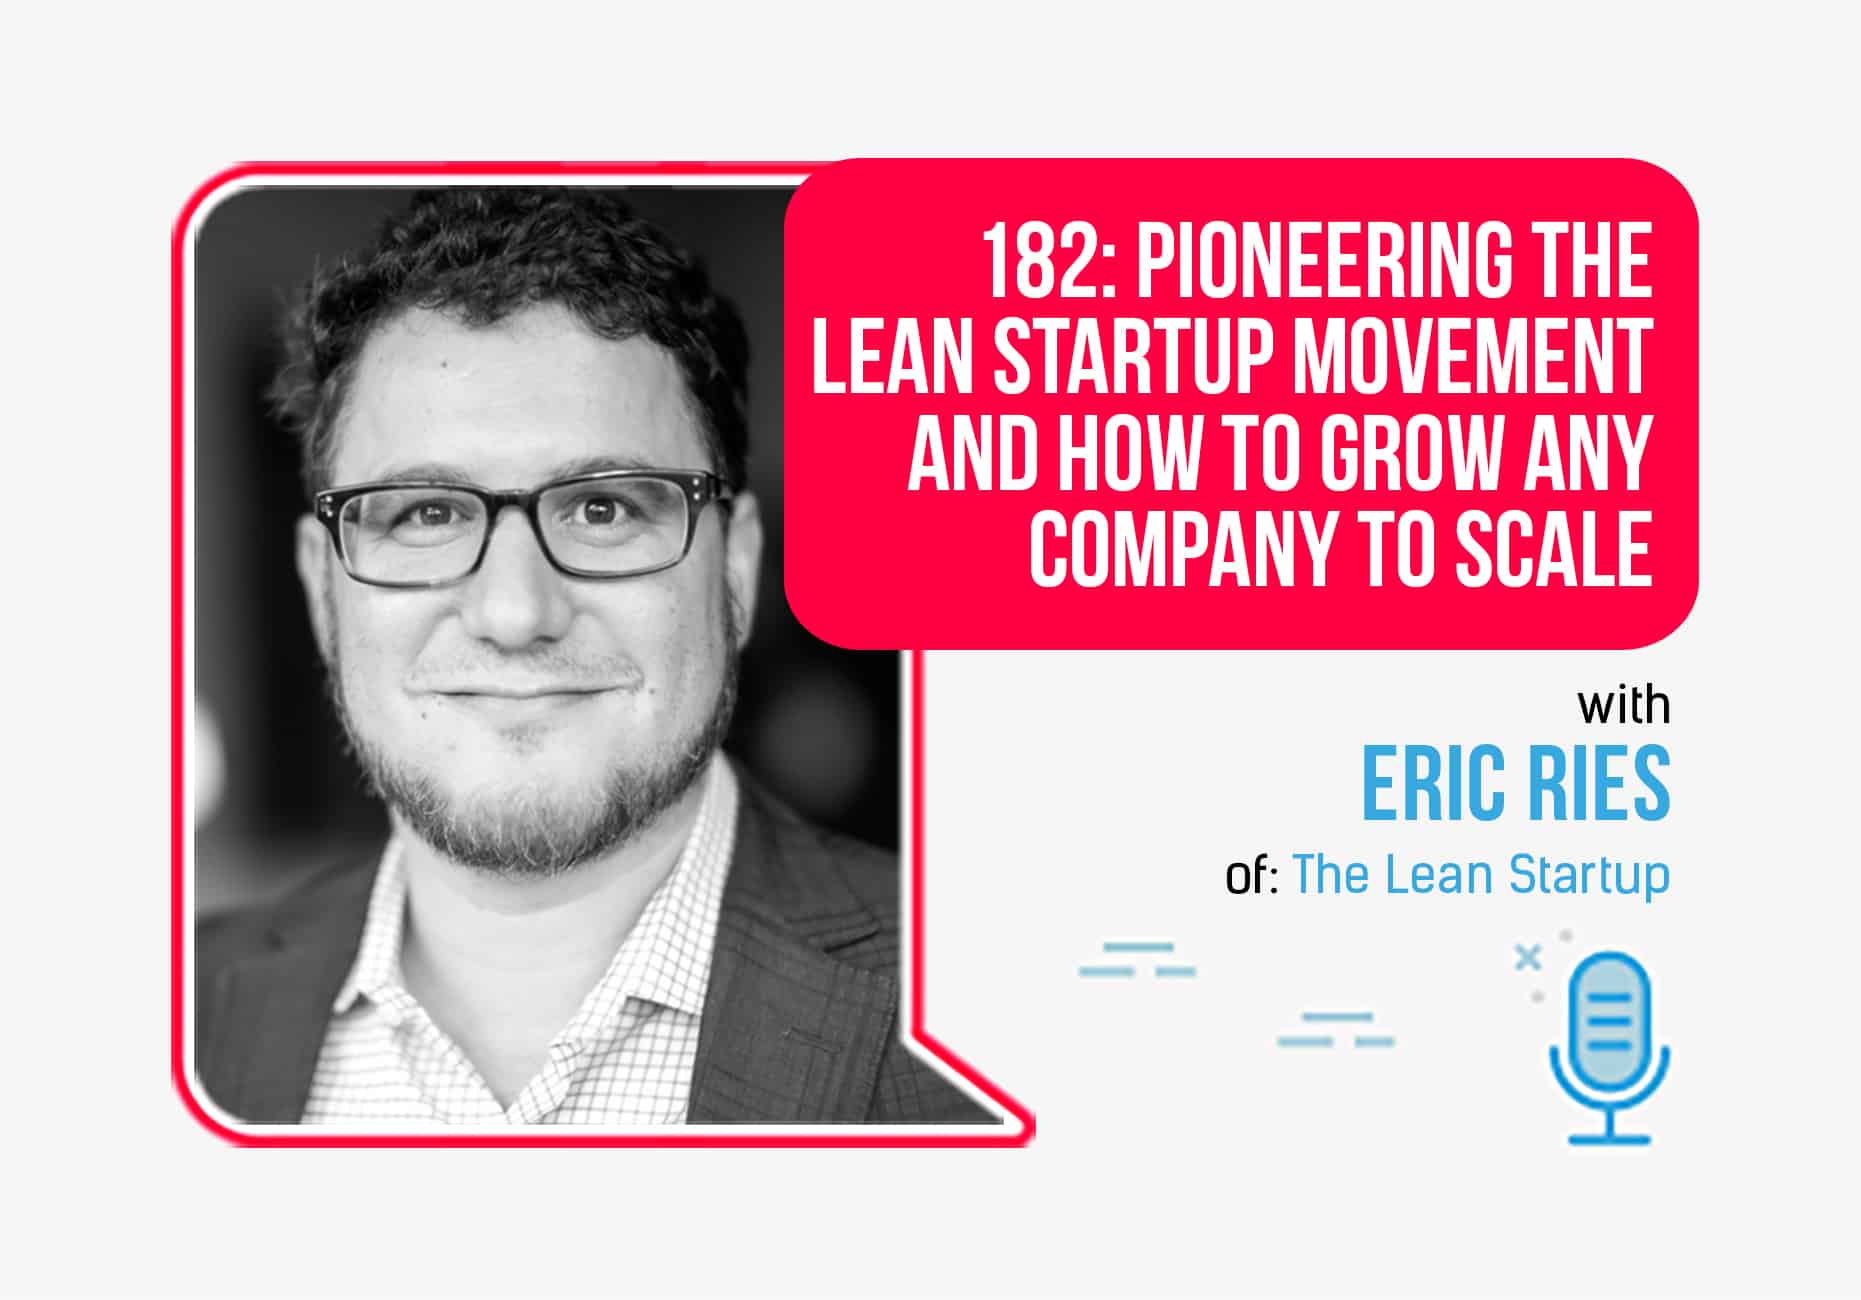 Eric Ries on Pioneering the Lean Movement